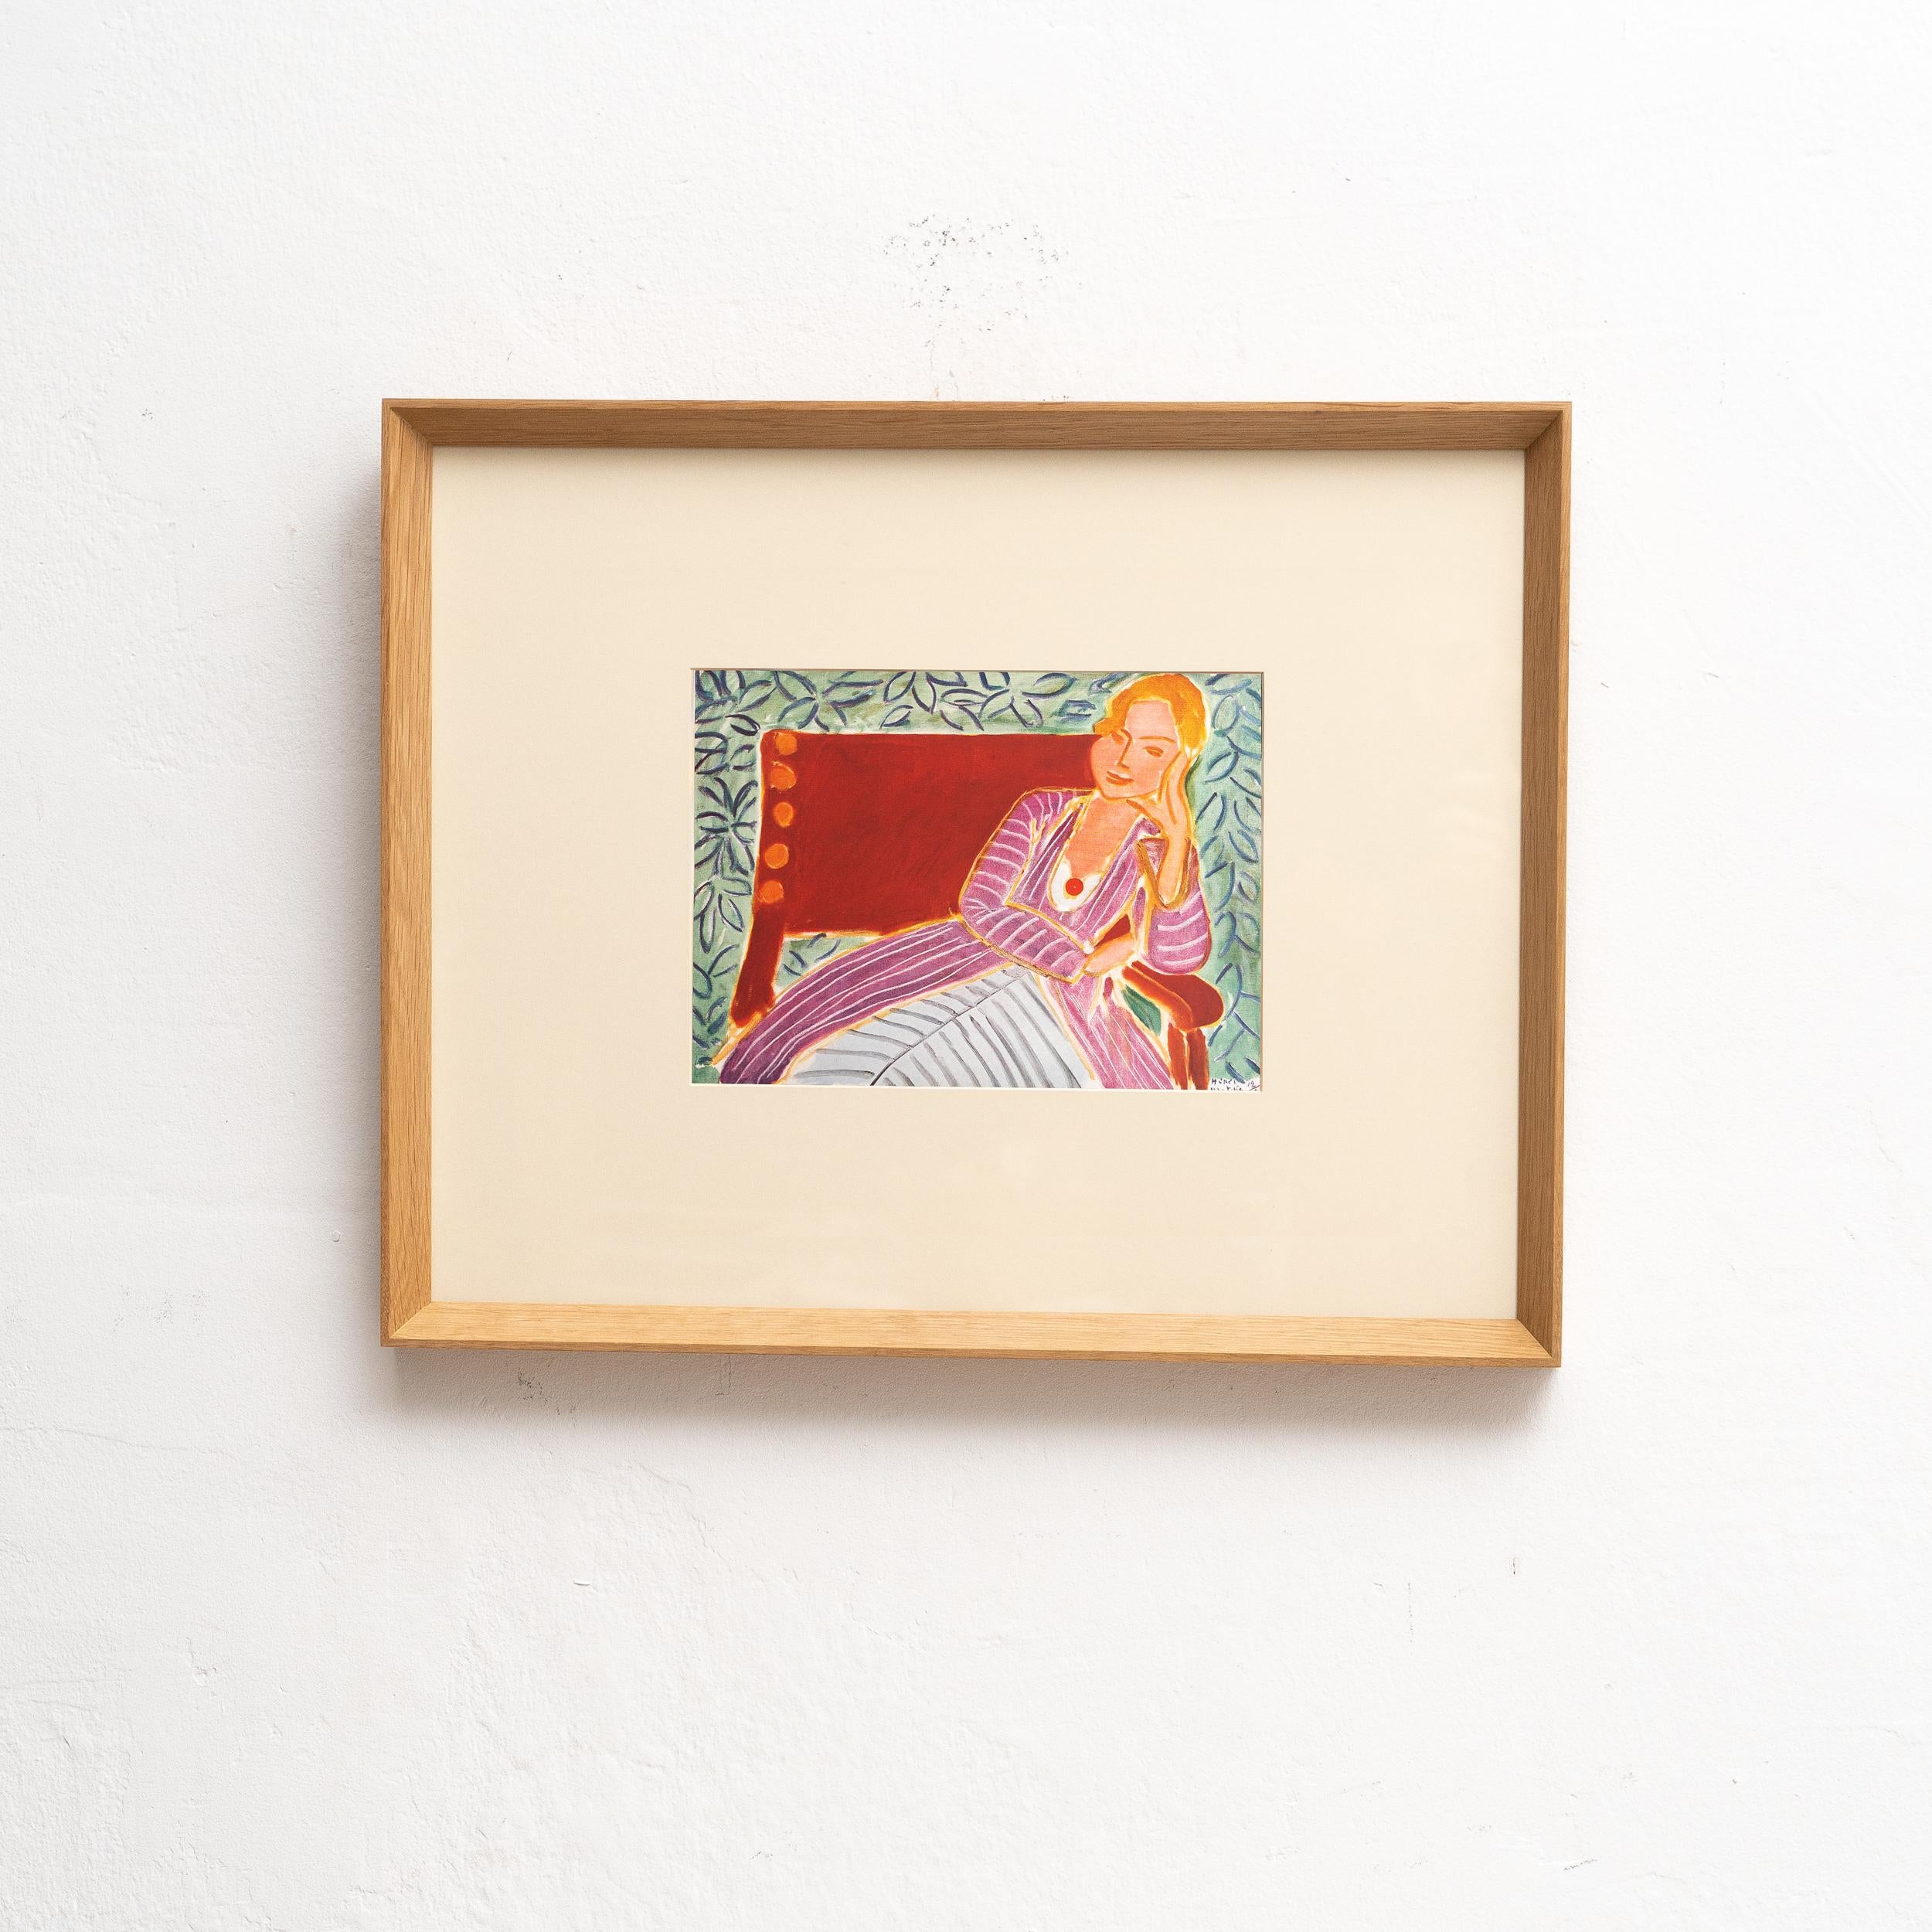 Immerse yourself in the timeless brilliance of Henri Matisse with this extraordinary color lithograph, expertly edited by Editions du Chene in Paris, France, in 1943. Adorned by a stunning solid wood frame, measuring 40.5cm in height and 51cm in